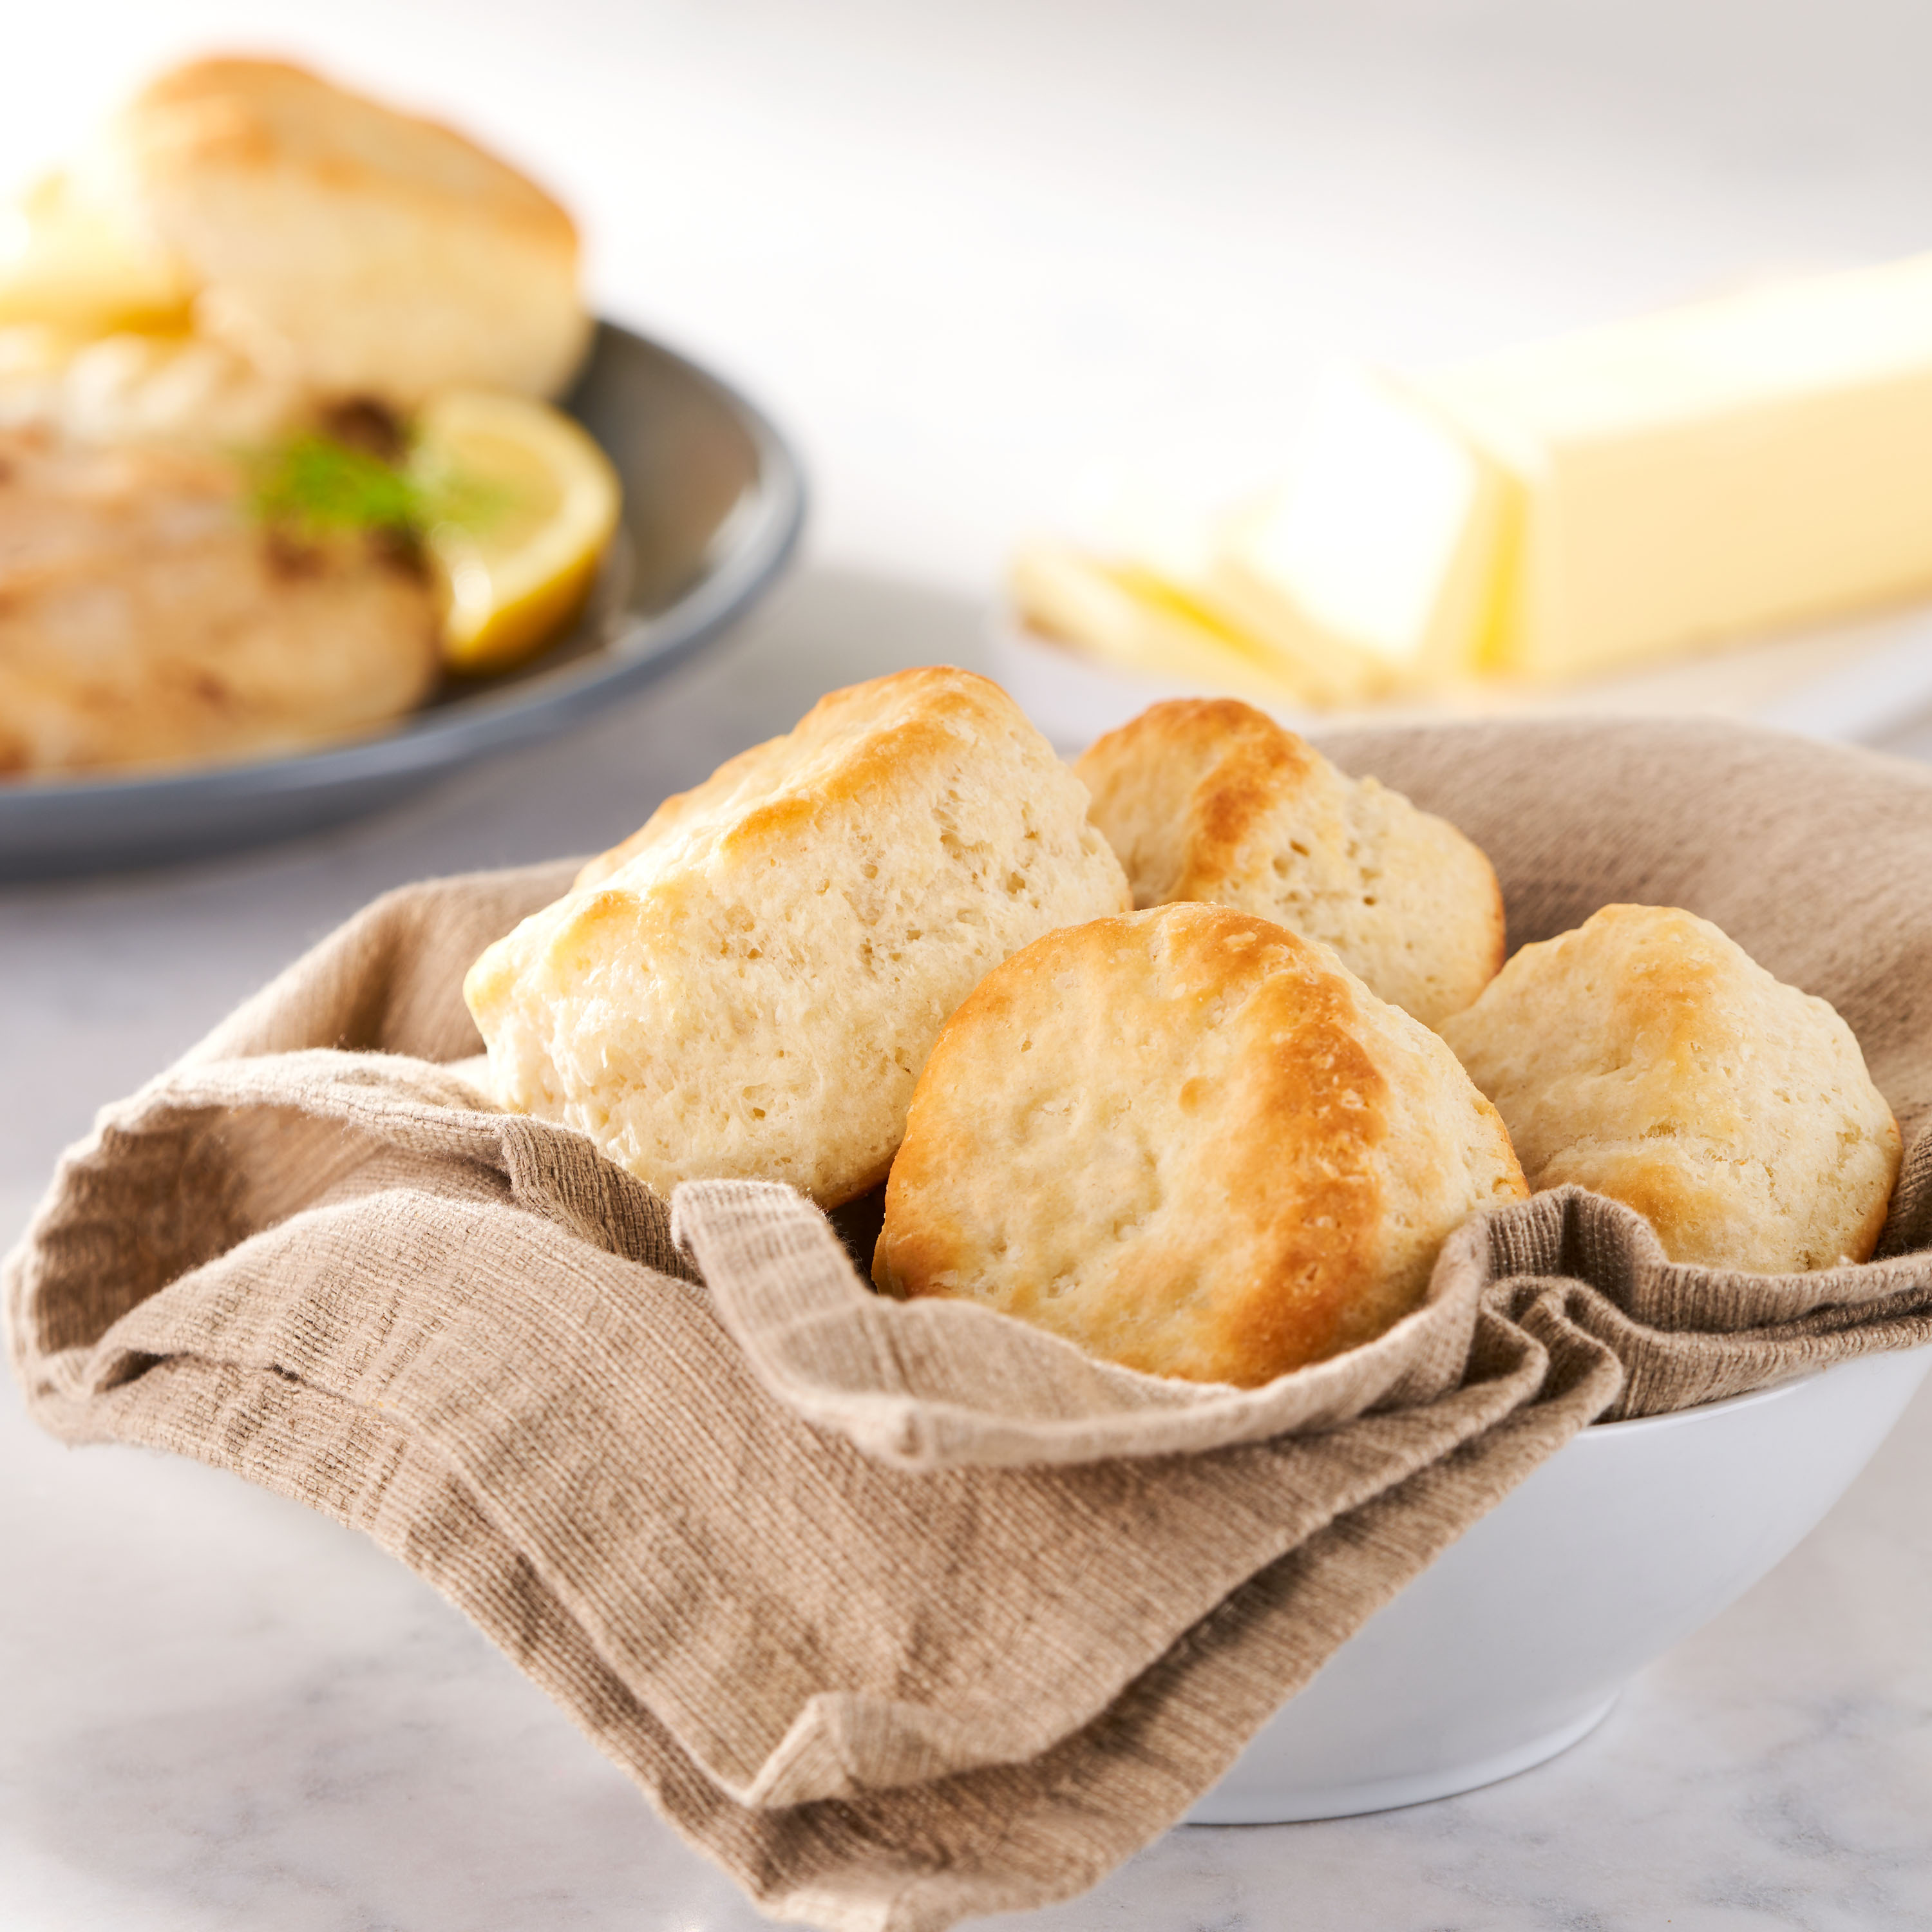 Great Value Buttermilk Biscuits, 41.6 oz, 20 Count (Frozen) - image 2 of 8